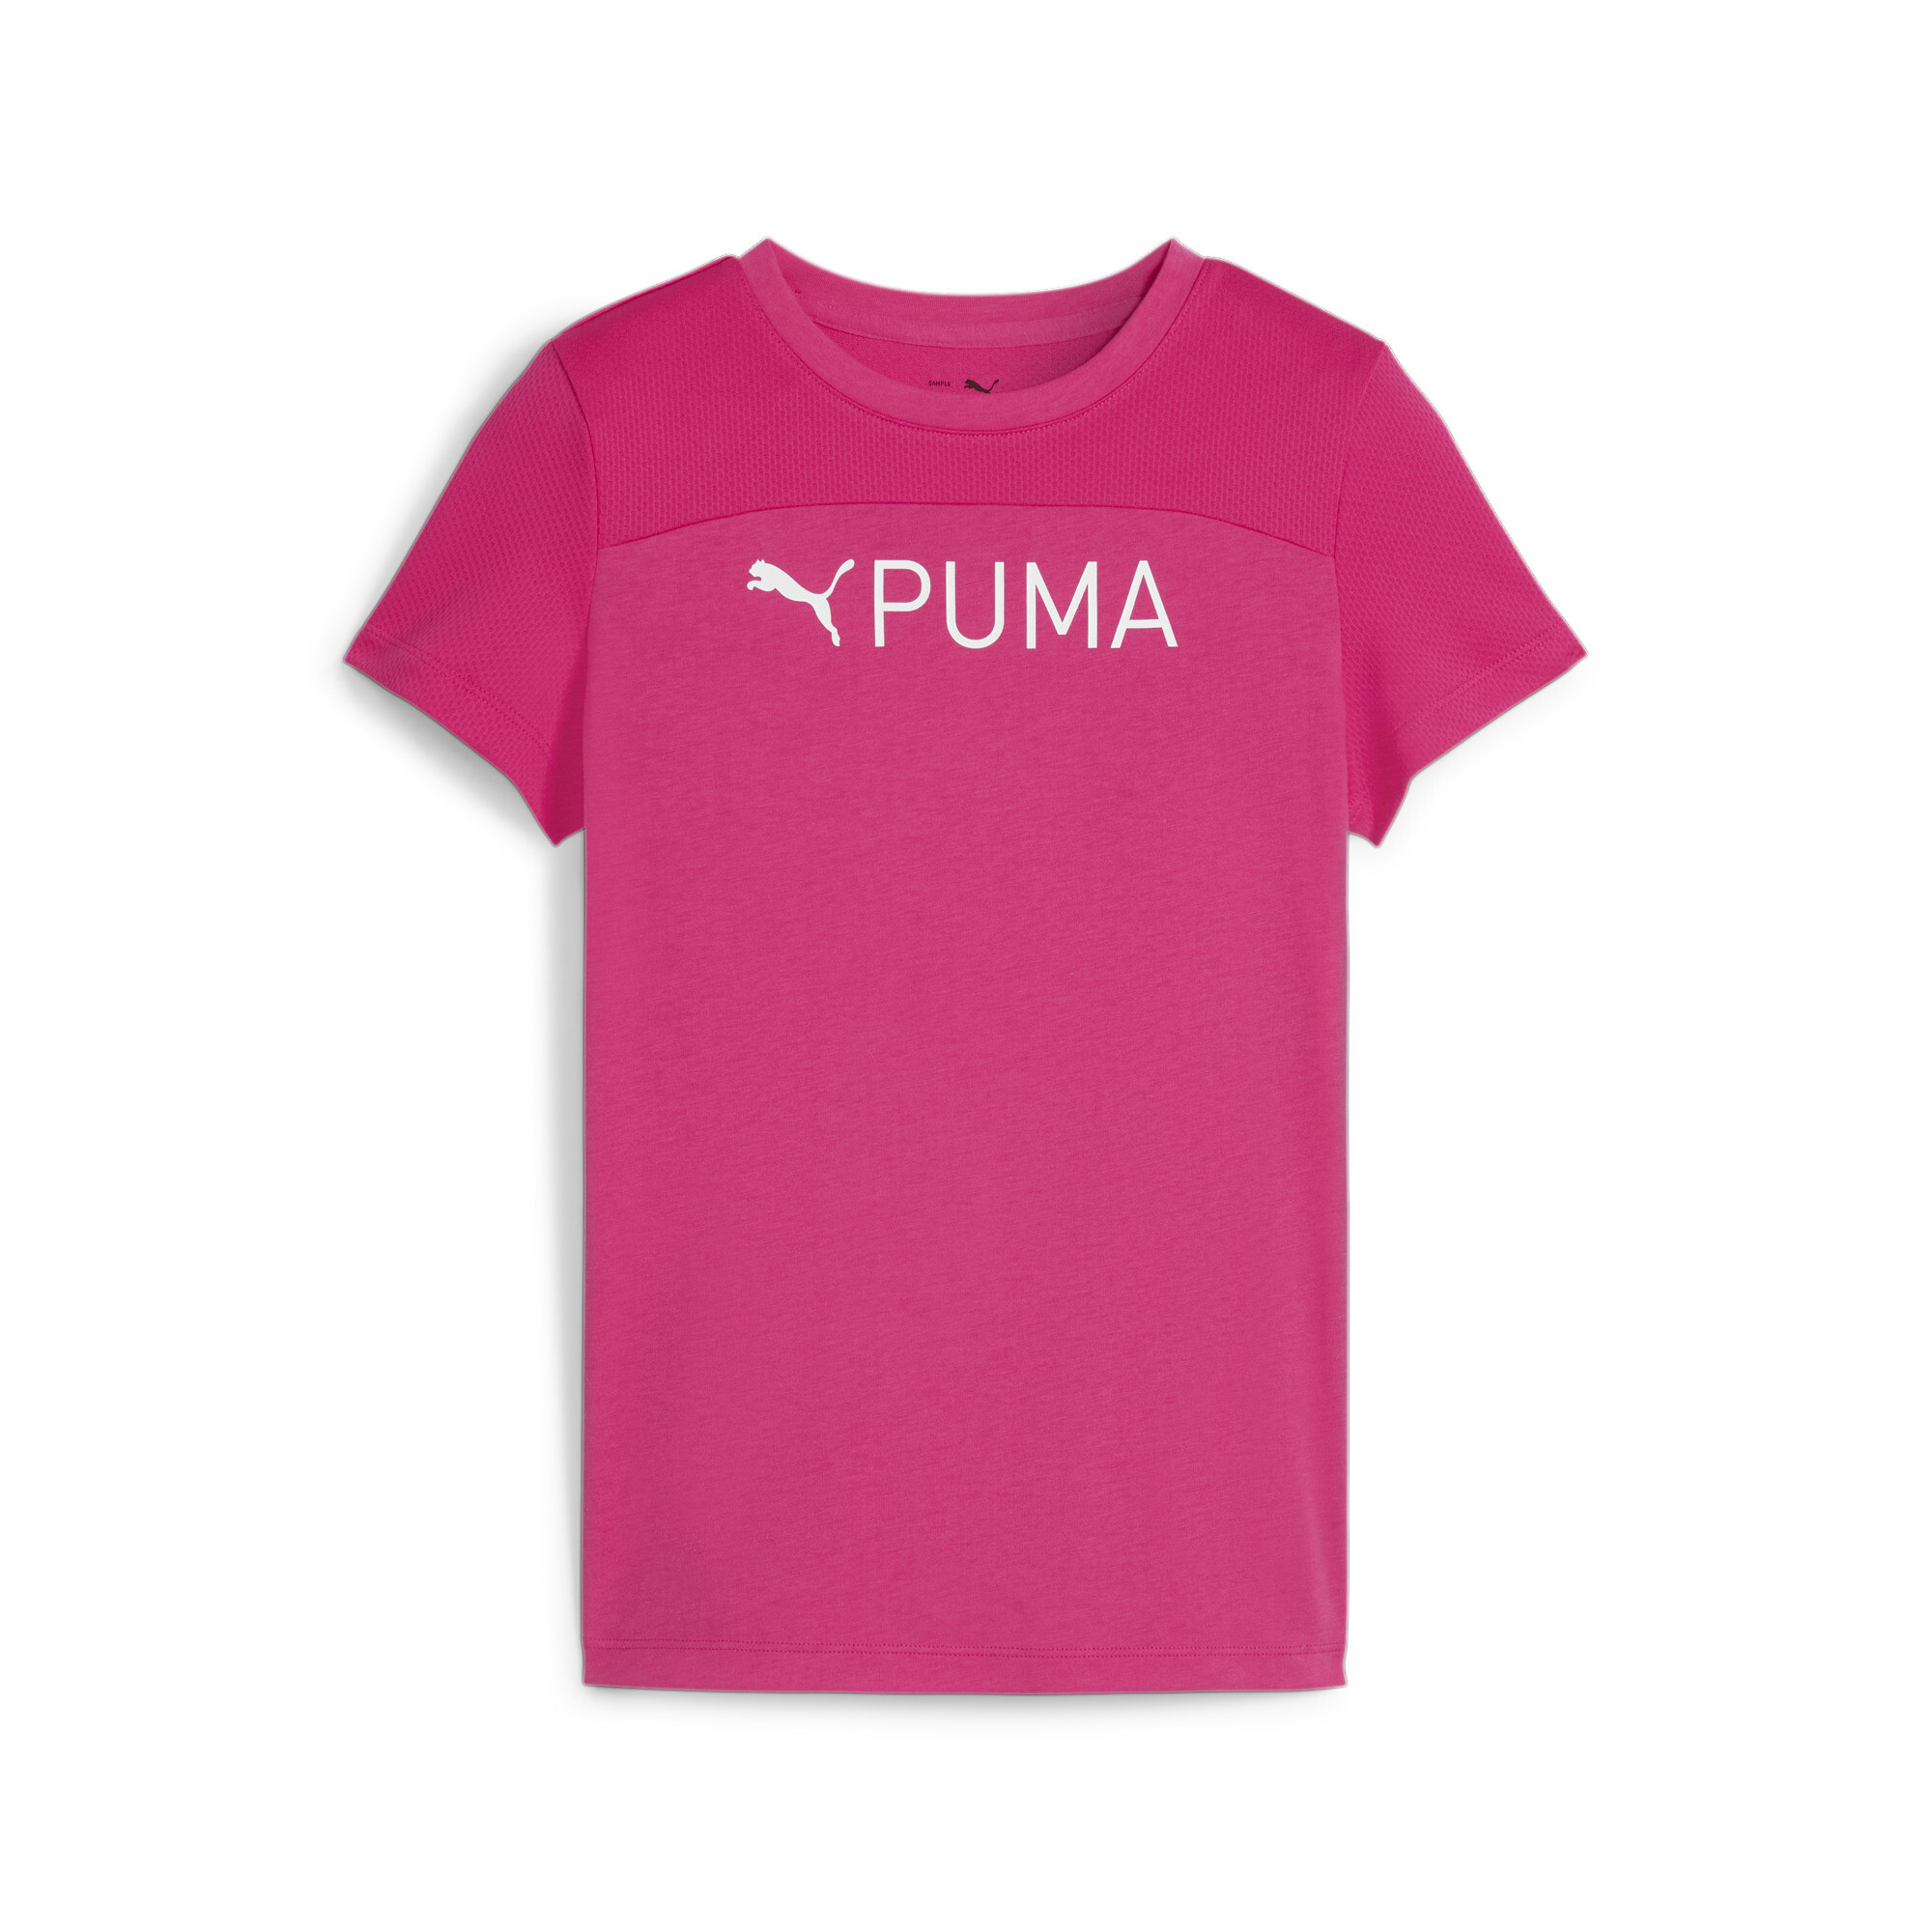 Women's Puma FIT Youth T-Shirt, Pink, Size 13-14Y, Shop